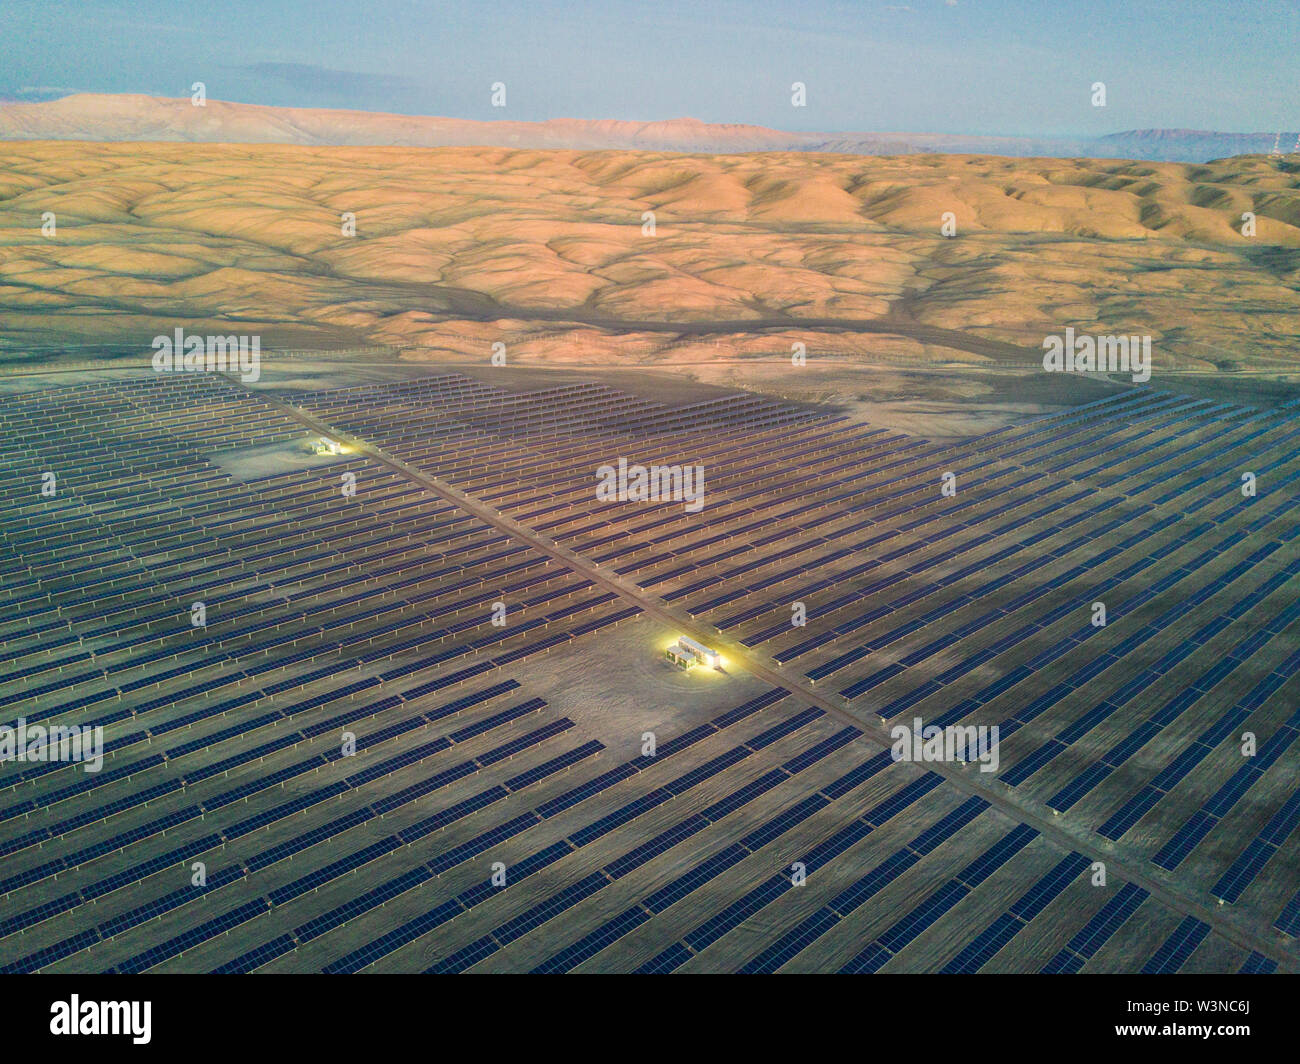 Aerial view of hundreds solar energy modules or panels rows along the dry lands at Atacama Desert, Chile. Huge Photovoltaic PV Plant in an arid scene Stock Photo